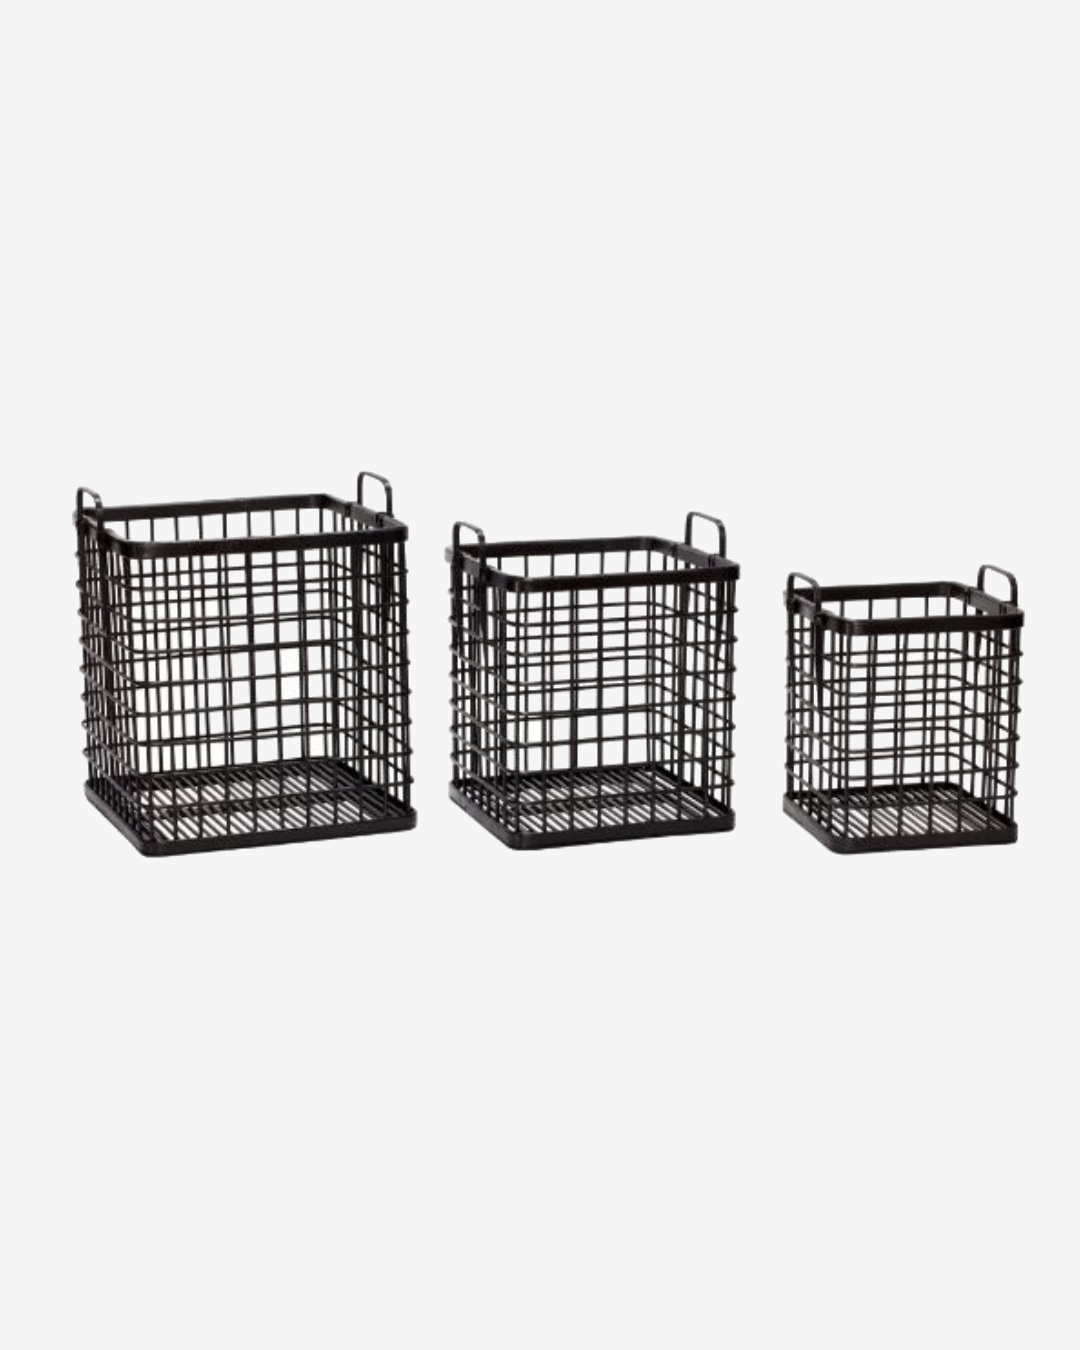 Bamboo baskets with handles in black